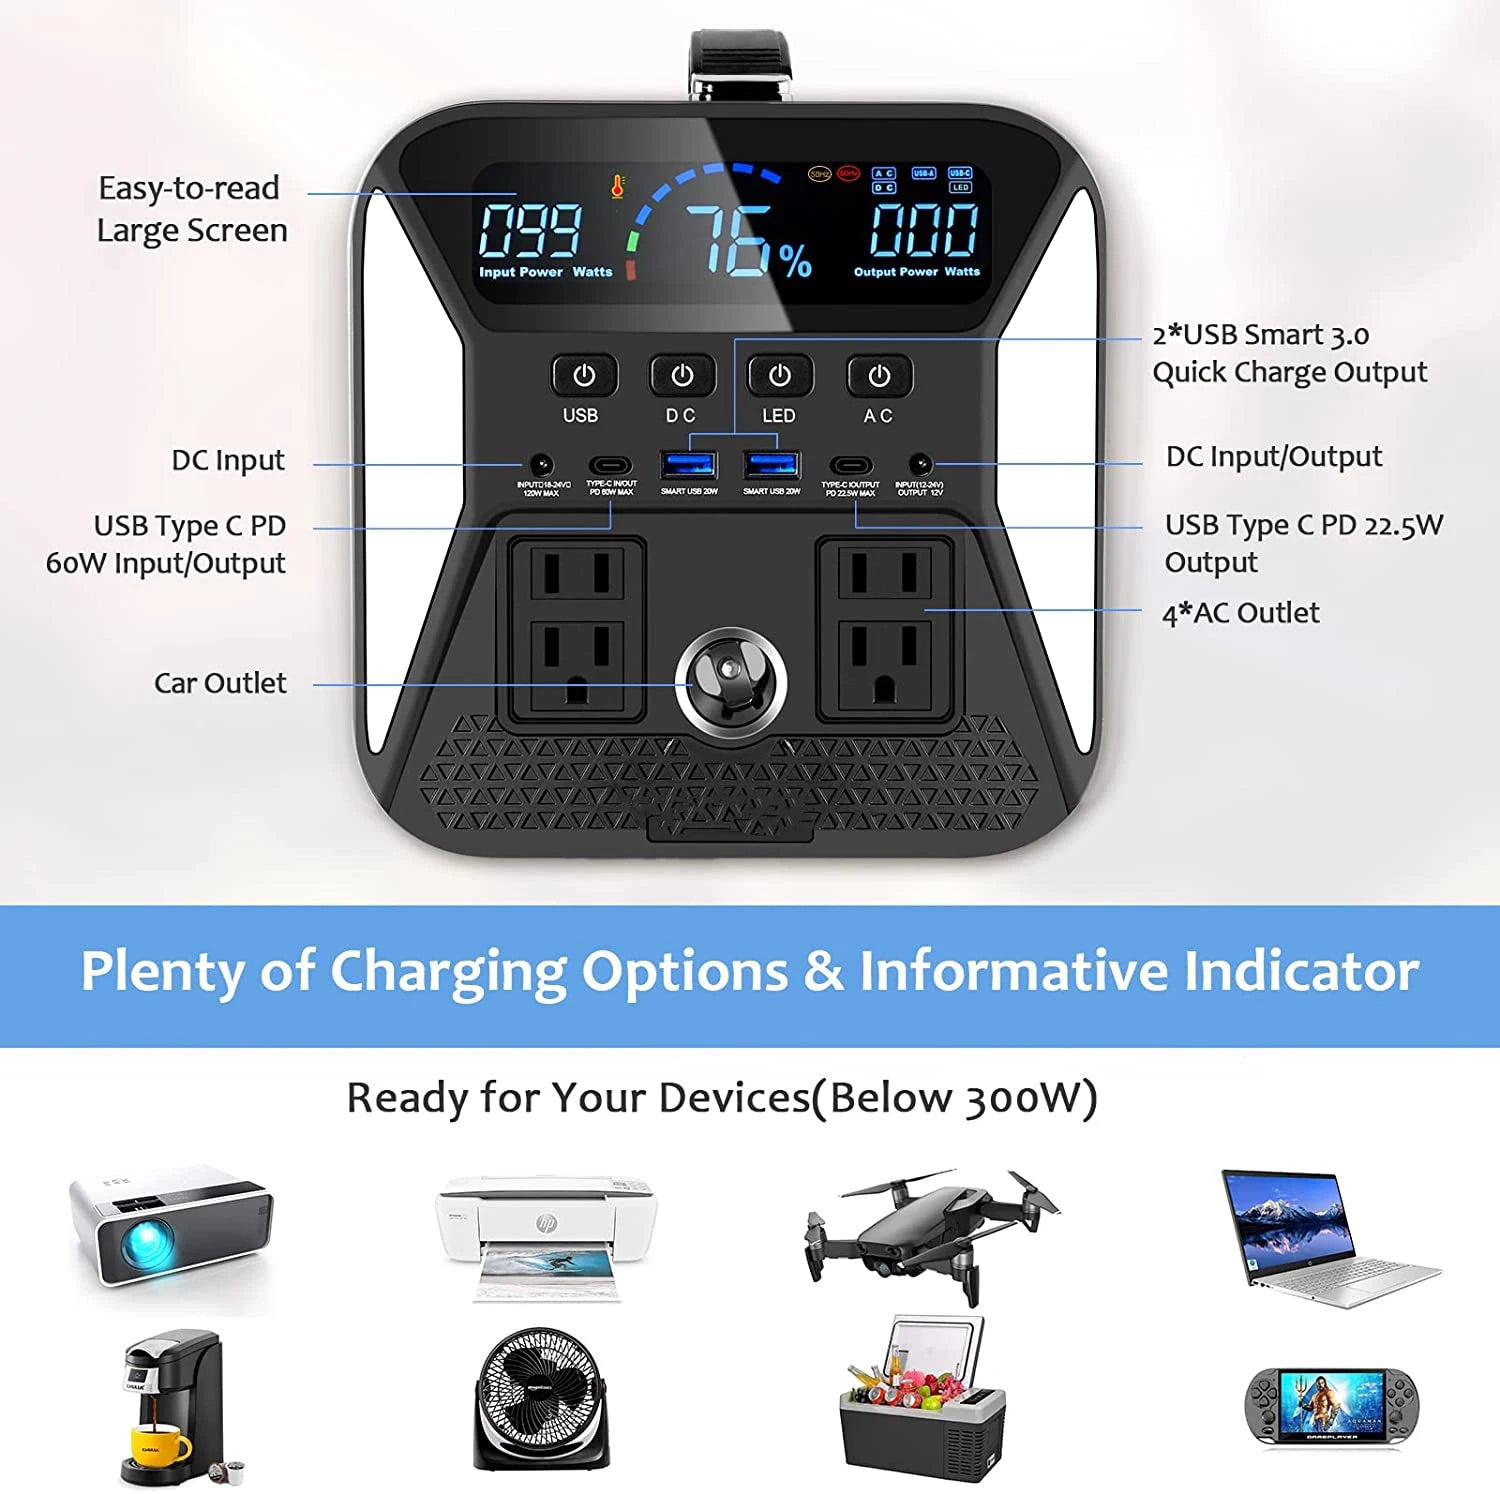 A-POWER 1000W Portable Power Station Fast Full Charging Lifepo4 Battery - Inverted Powers